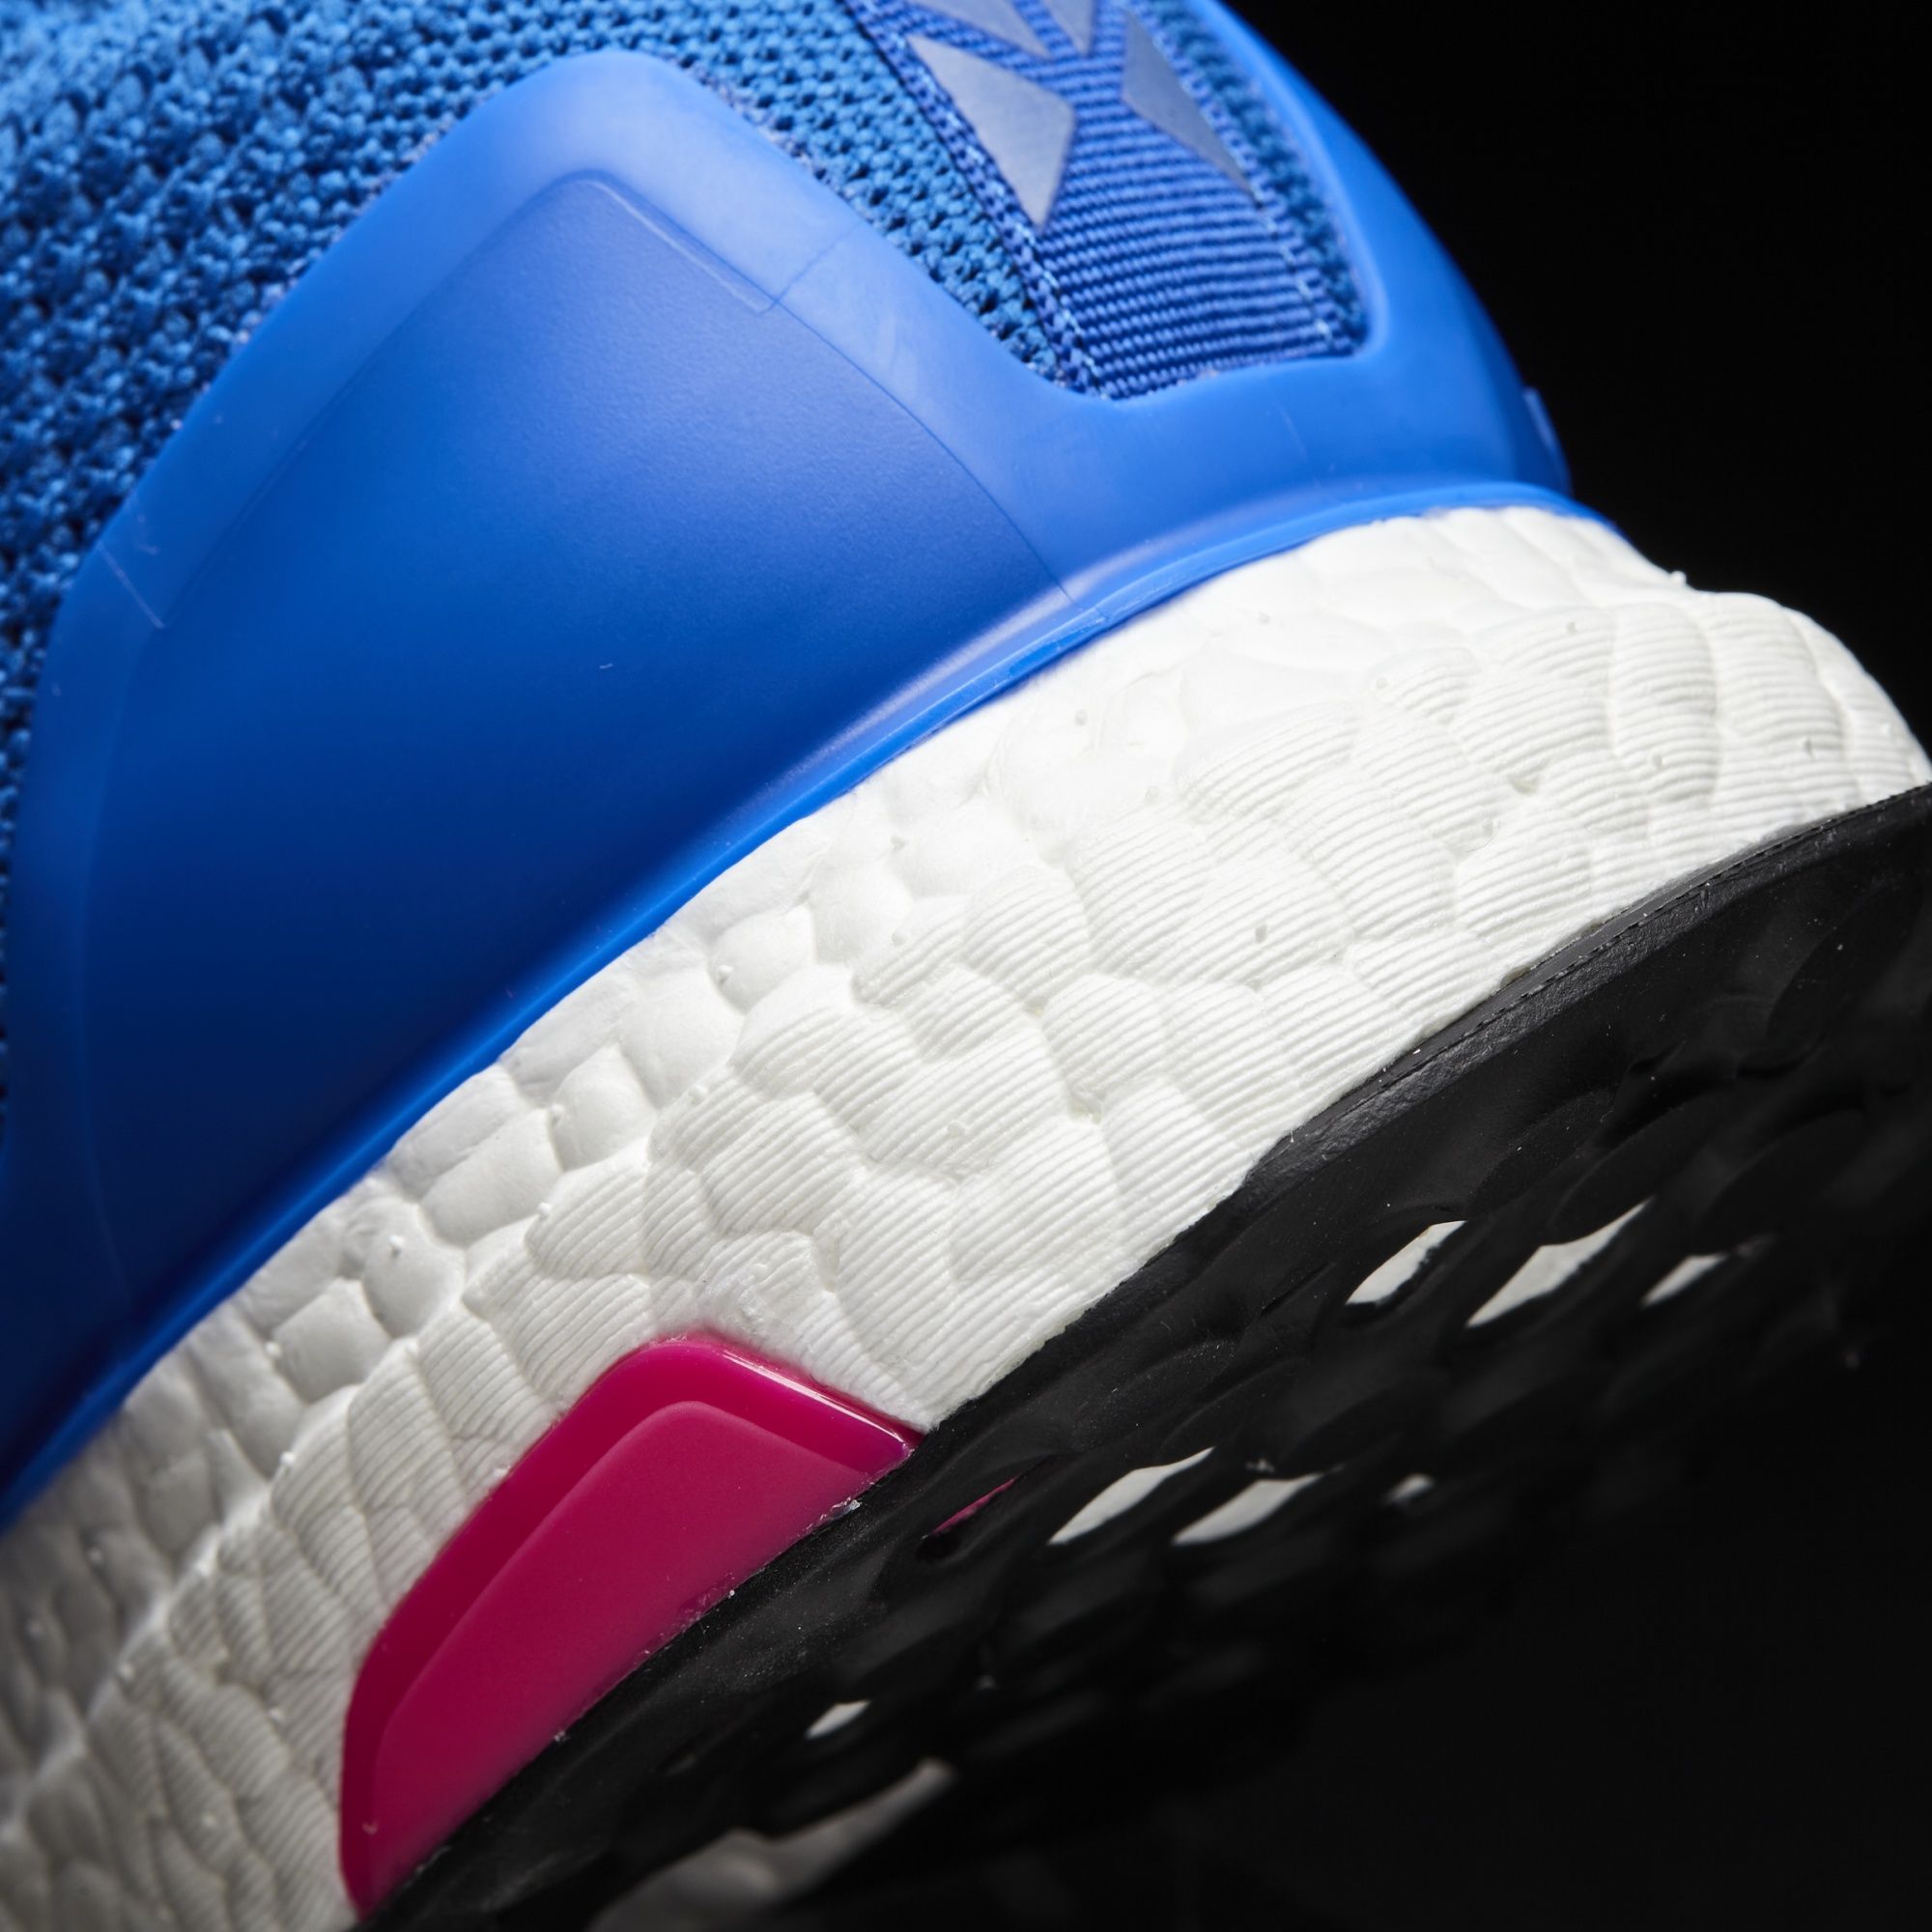 Adidas ACE 16+ Purecontrol Ultra Boost
Color Blue / Shock Pink